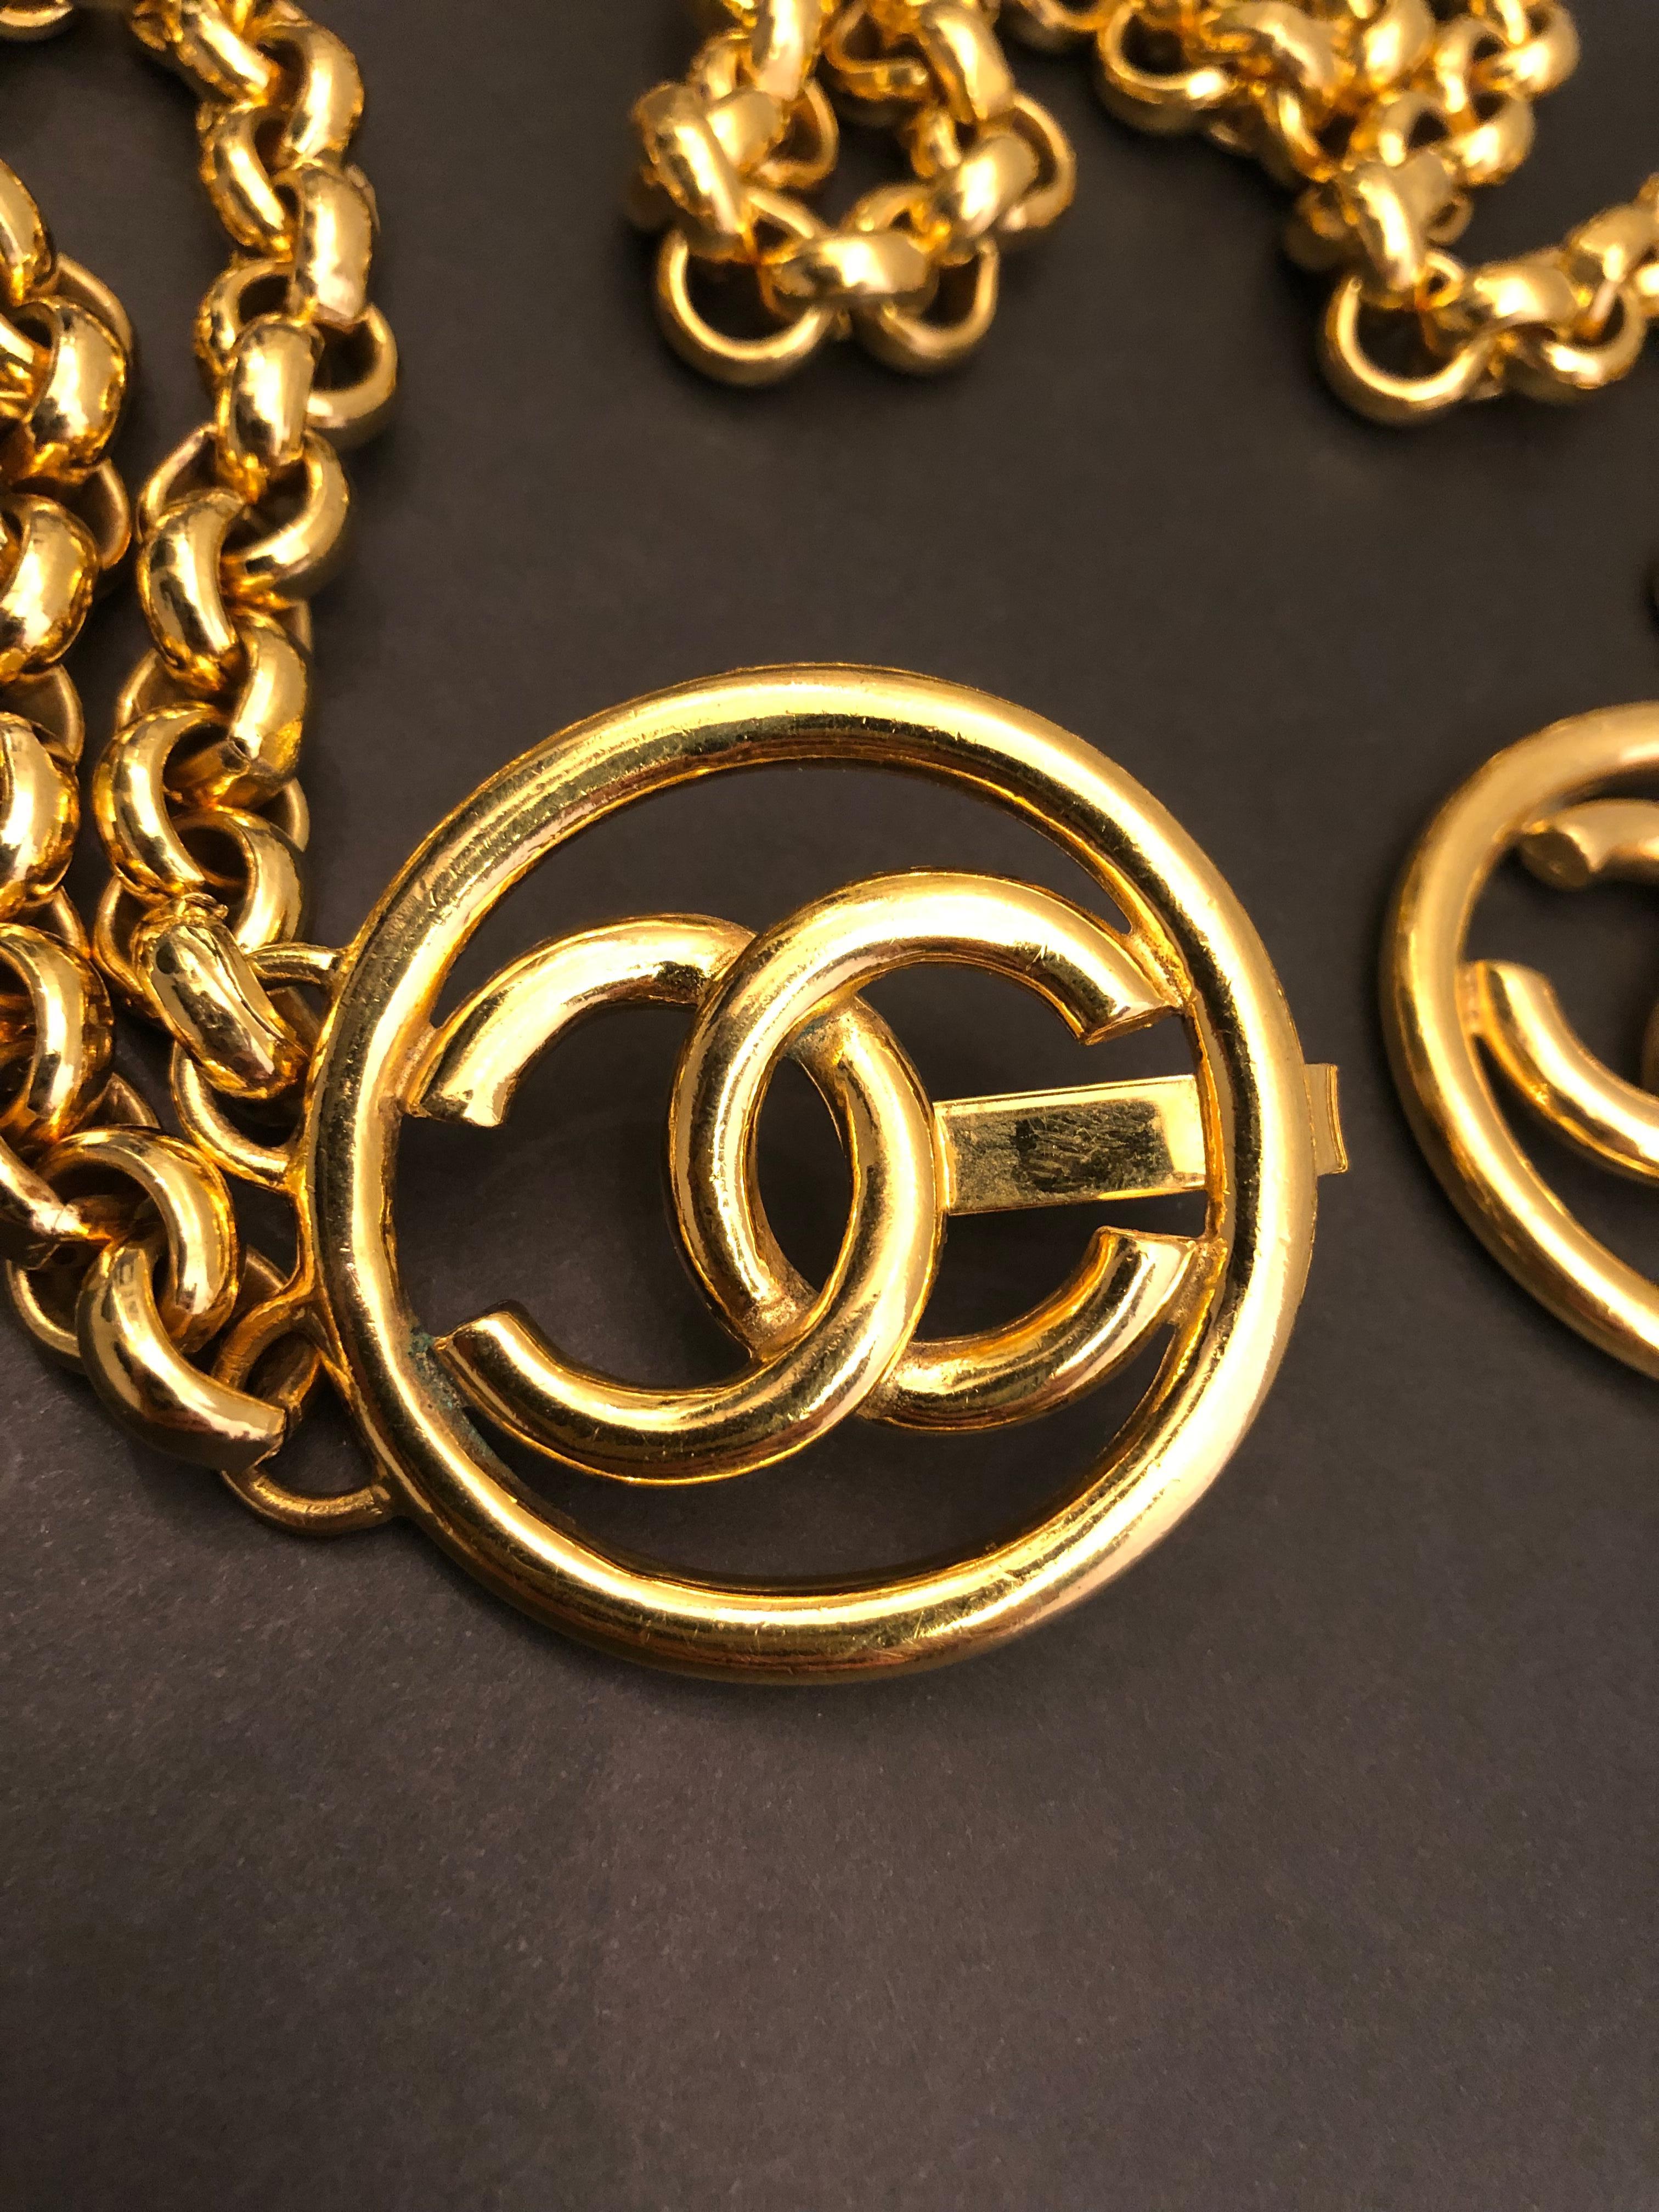 1993 Vintage CHANEL Gold Toned Clover CC Chain Belt 42 Inches Long For Sale 5